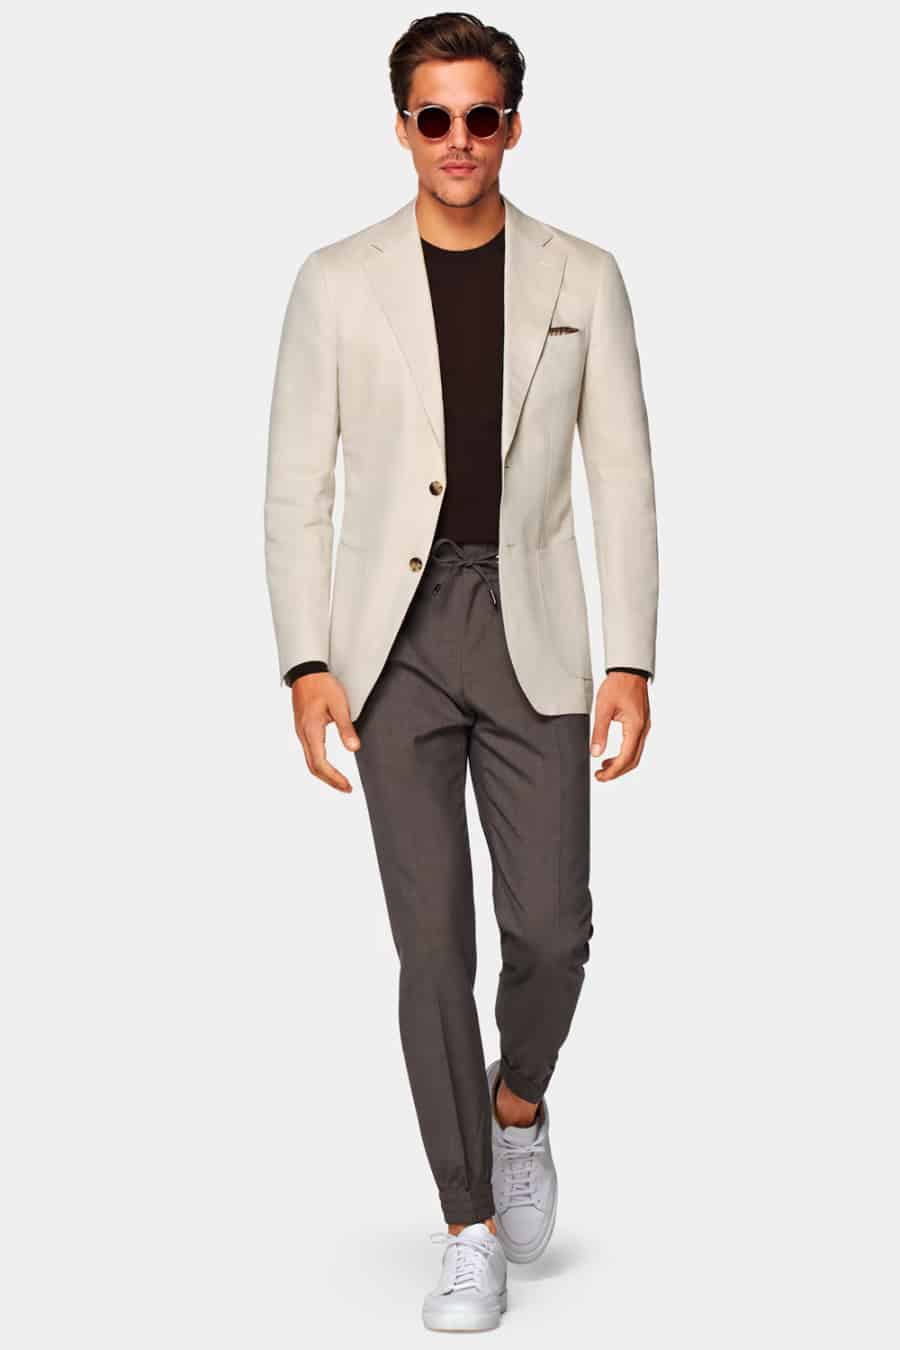 Men's brown drawstring trousers, brown T-shirt, beige blazer and white sneakers outfit